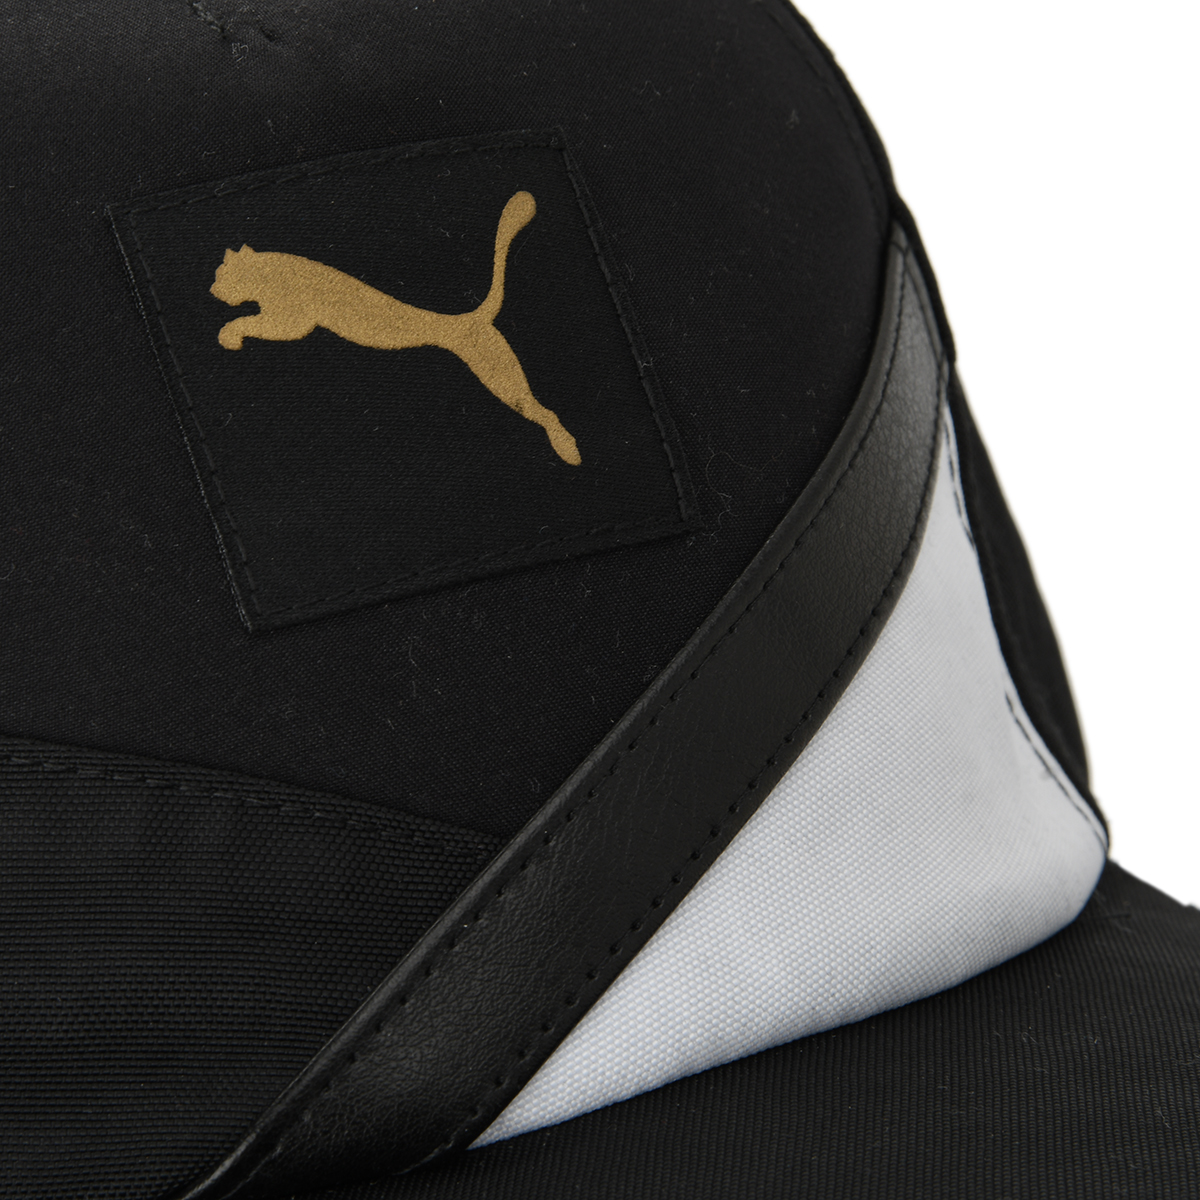 Gorra Puma As,  image number null